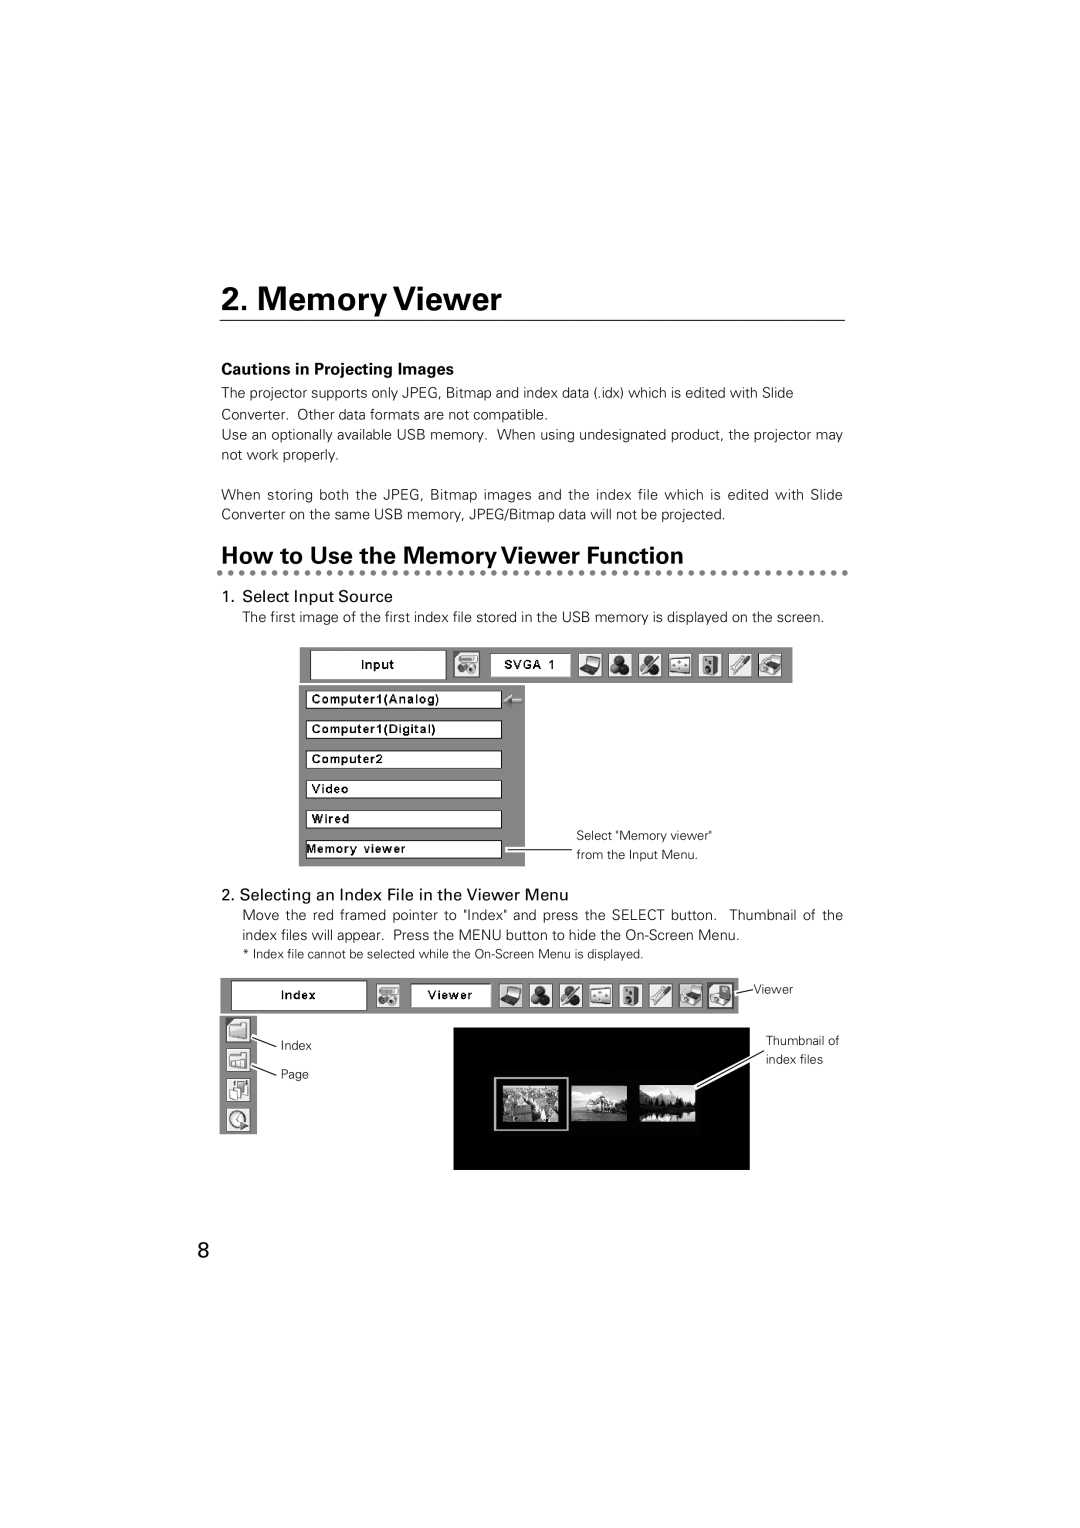 Sanyo POA-USB02 owner manual How to Use the Memory Viewer Function, Cautions in Projecting Images, Select Input Source 